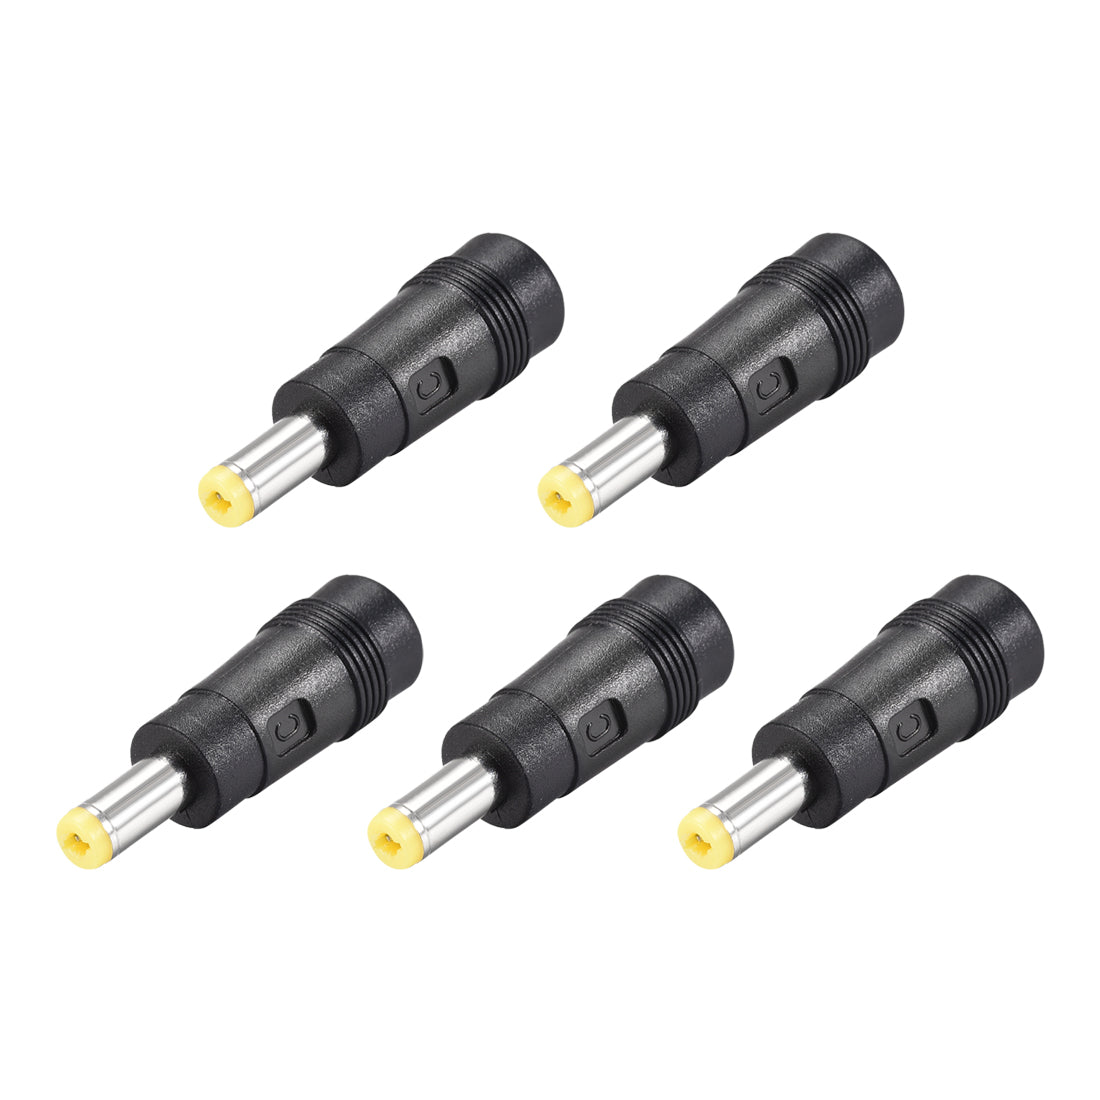 uxcell Uxcell 5Pcs DC Power Converter 5.5mm x 2.5mm Male to 5.5mm x 2.1mm Female Connector